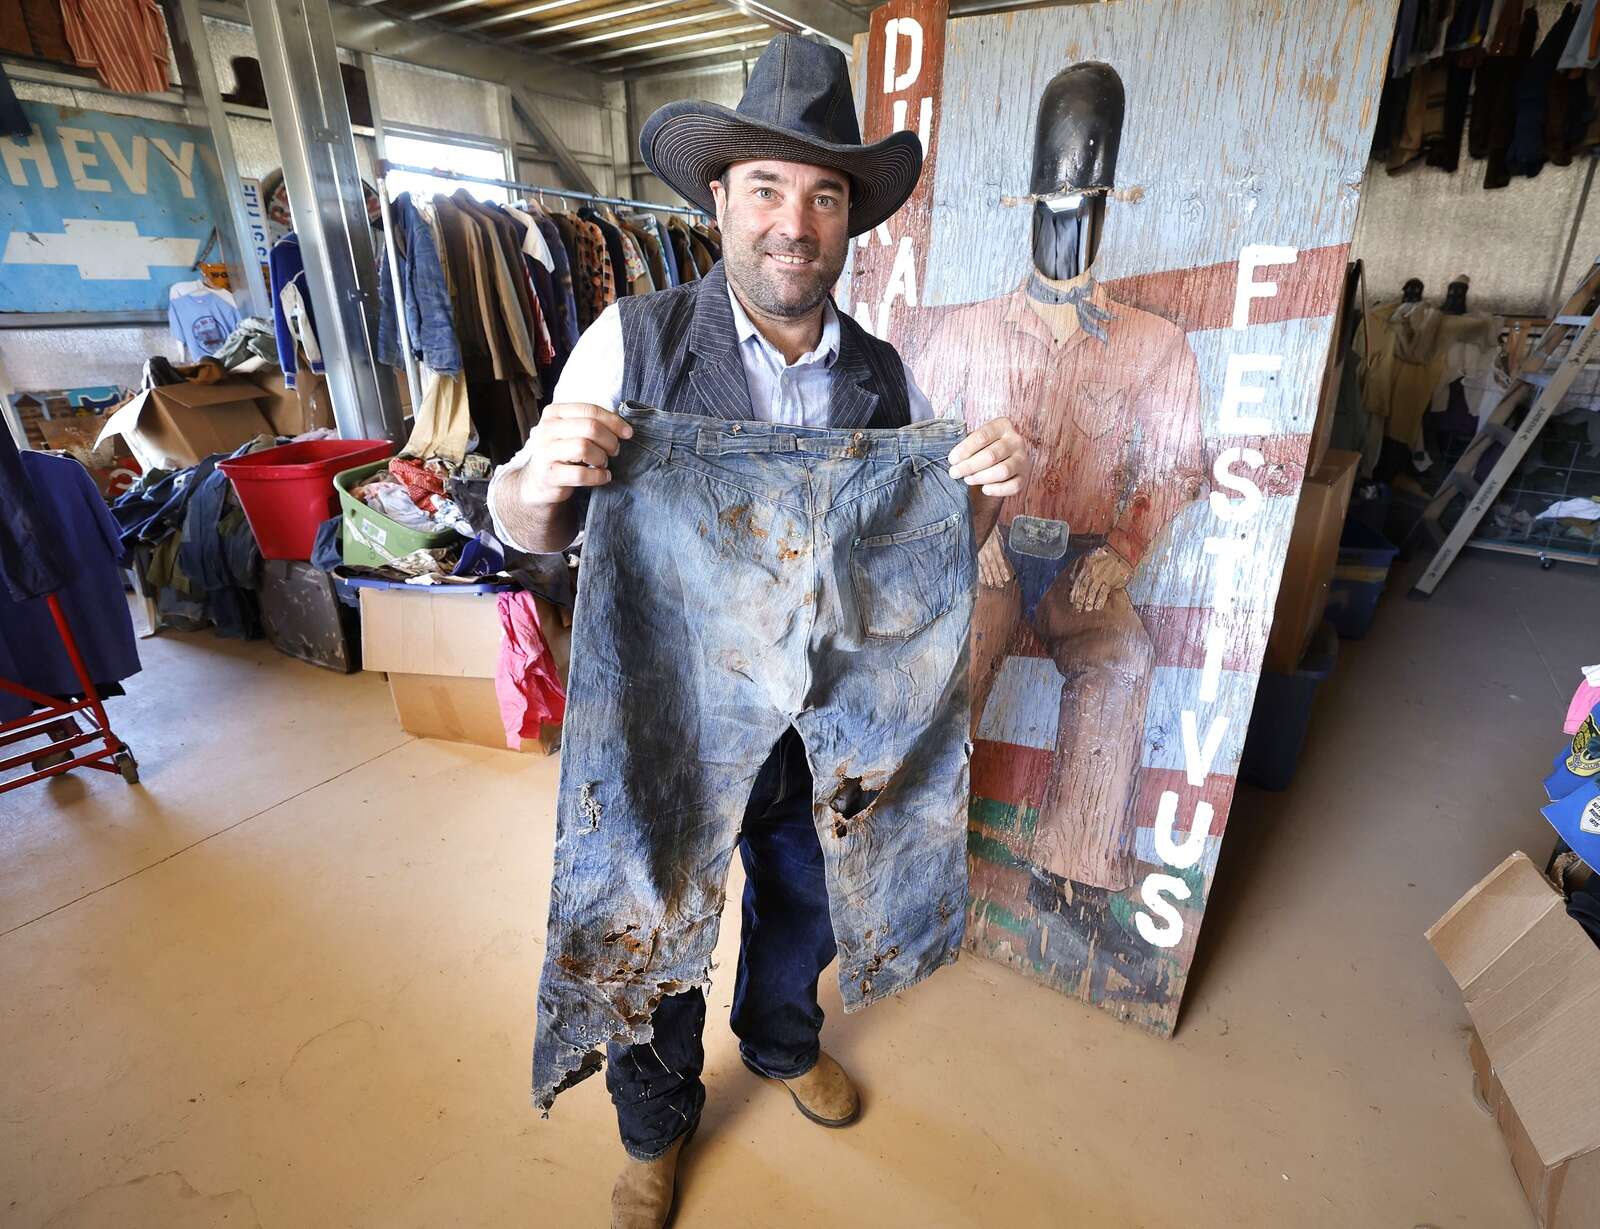 Durango Levi's collector to auction off 'oldest' pair of jeans – The Journal